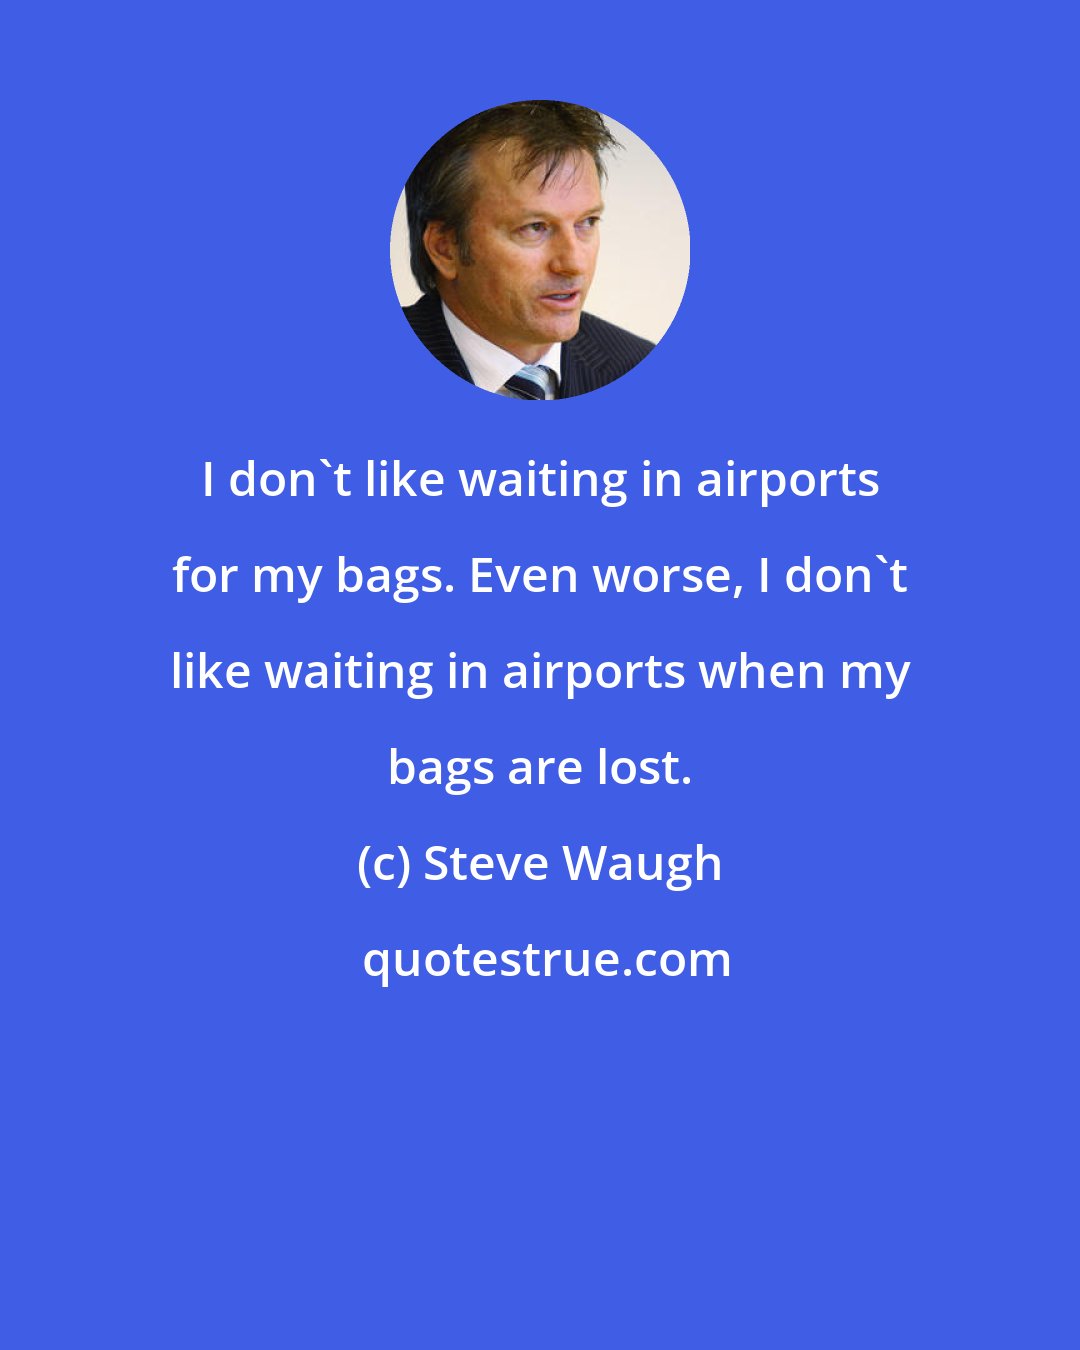 Steve Waugh: I don't like waiting in airports for my bags. Even worse, I don't like waiting in airports when my bags are lost.